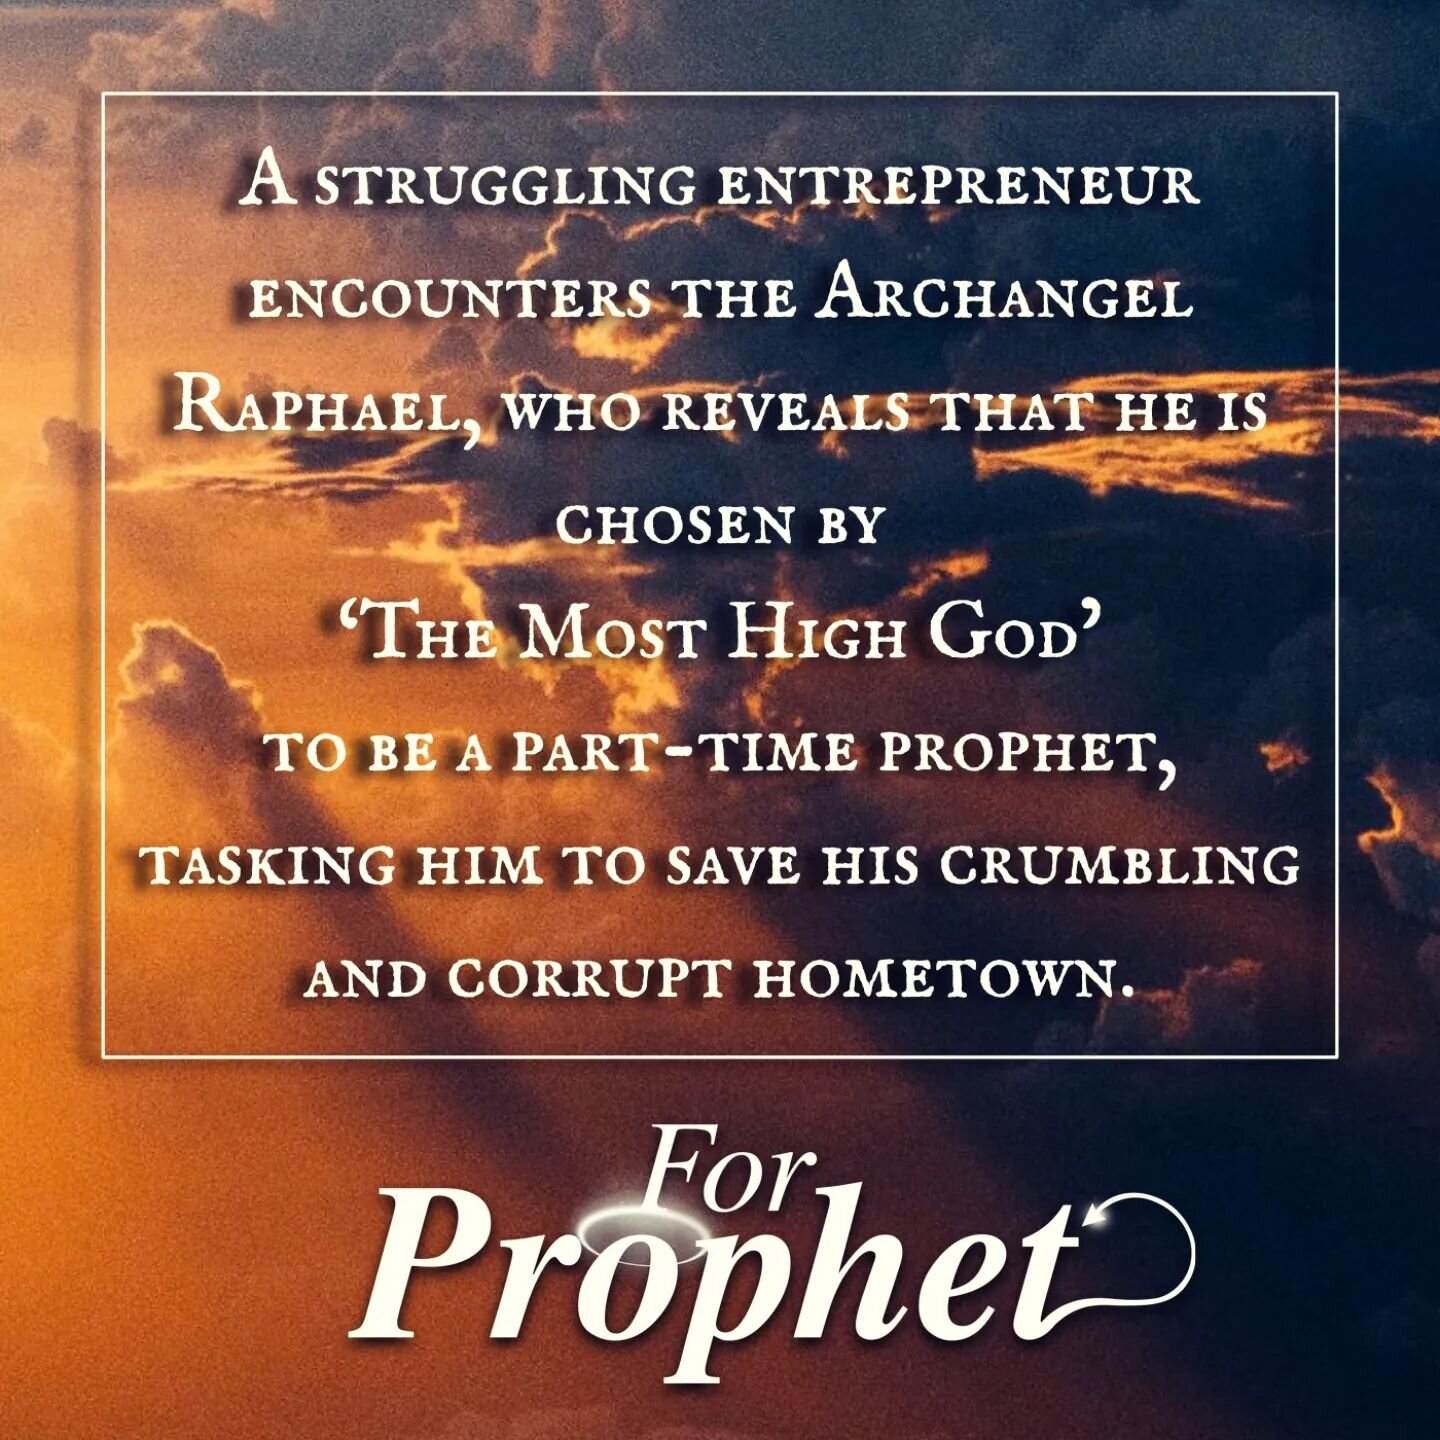 #ForProphet 🎬🎥🎞️ #ForProphetFilm #ComingSoon

A struggling entrepreneur encounters the Archangel Raphael, who reveals that he is chosen by&nbsp;&lsquo;The Most High God&rsquo;&nbsp;to be a part-time prophet, tasking him to save his crumbling and c